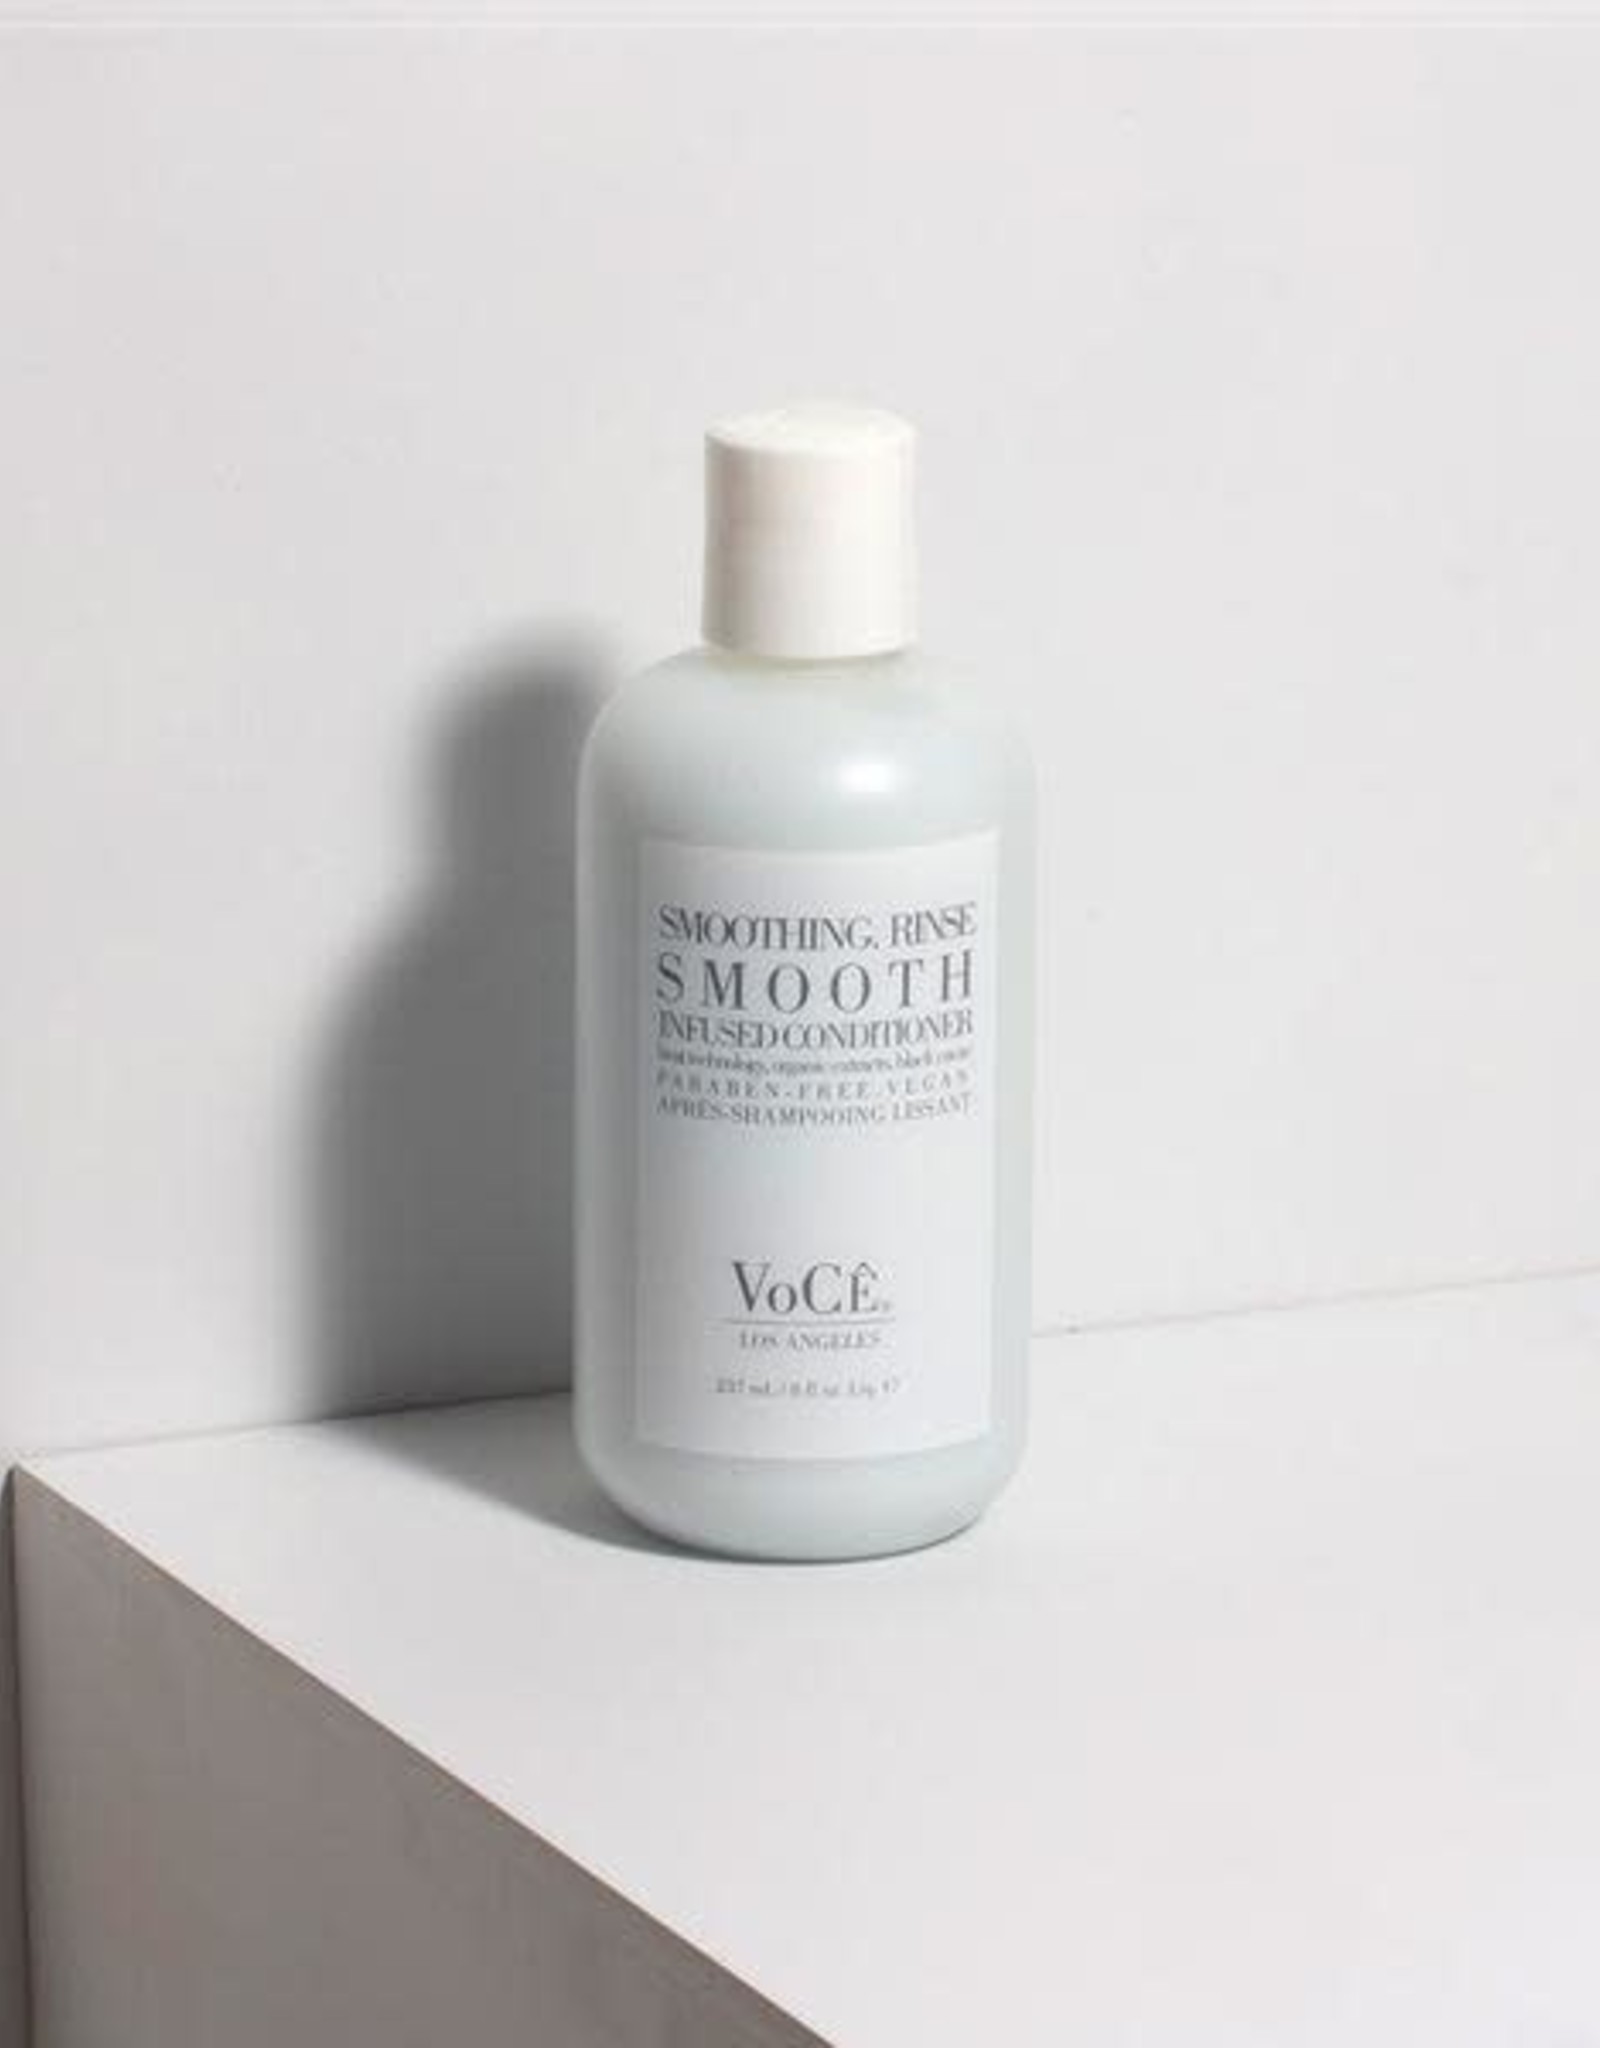 Voce Smoothing Rinse